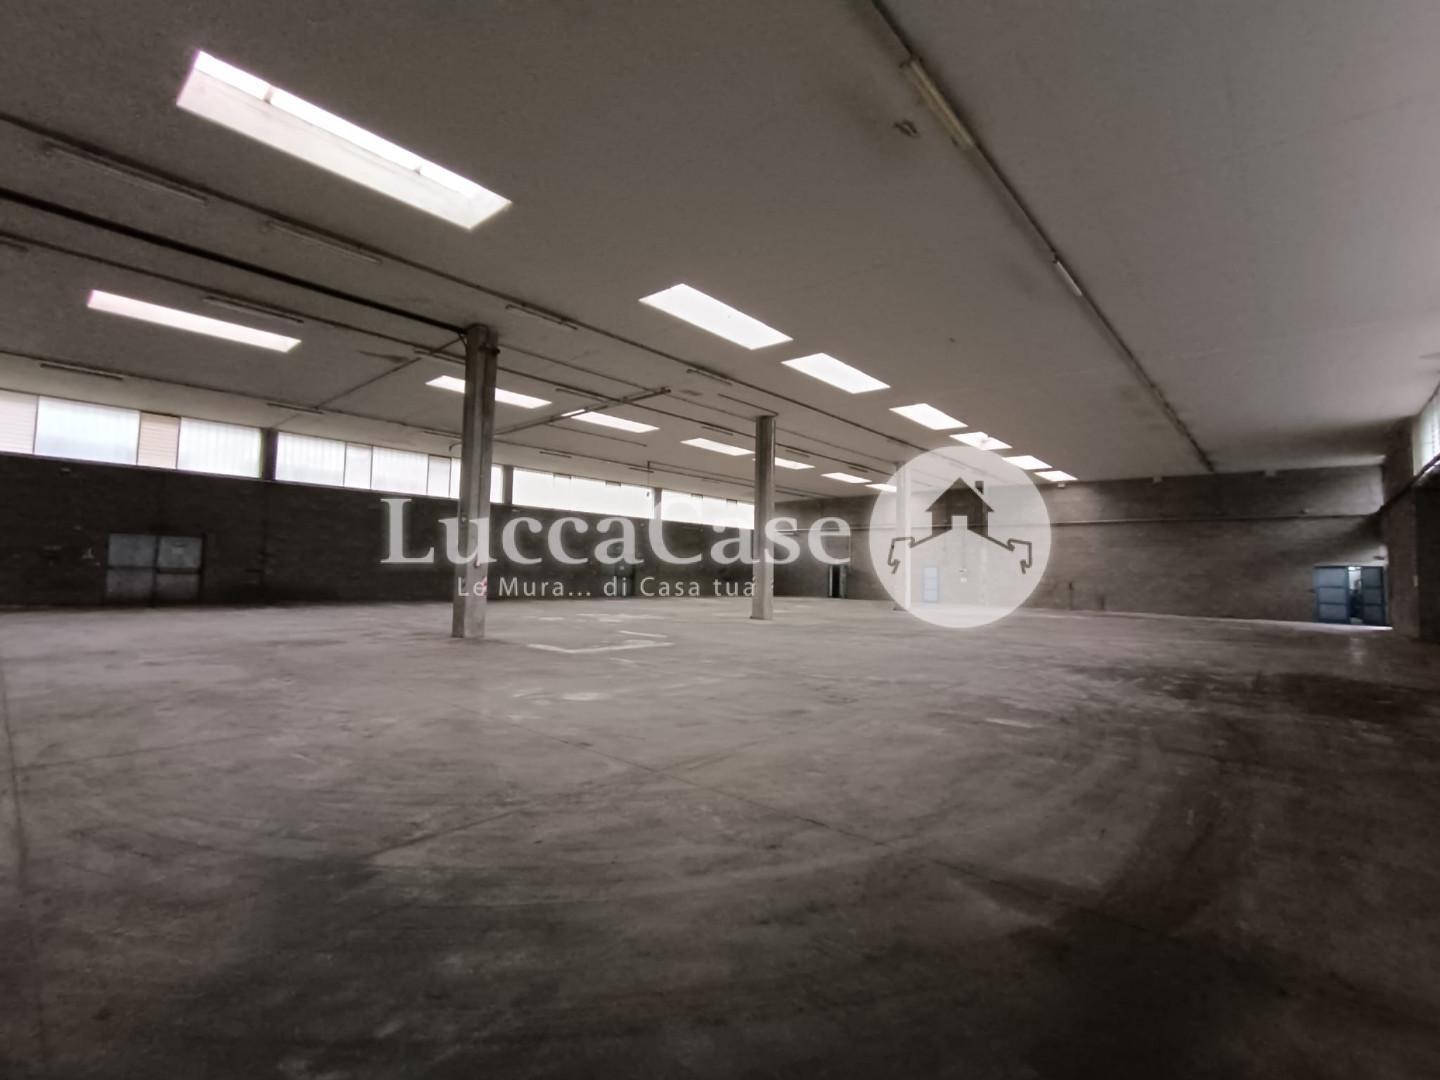 Commercial depot for commercial rentals in Coreglia Antelminelli (LU)